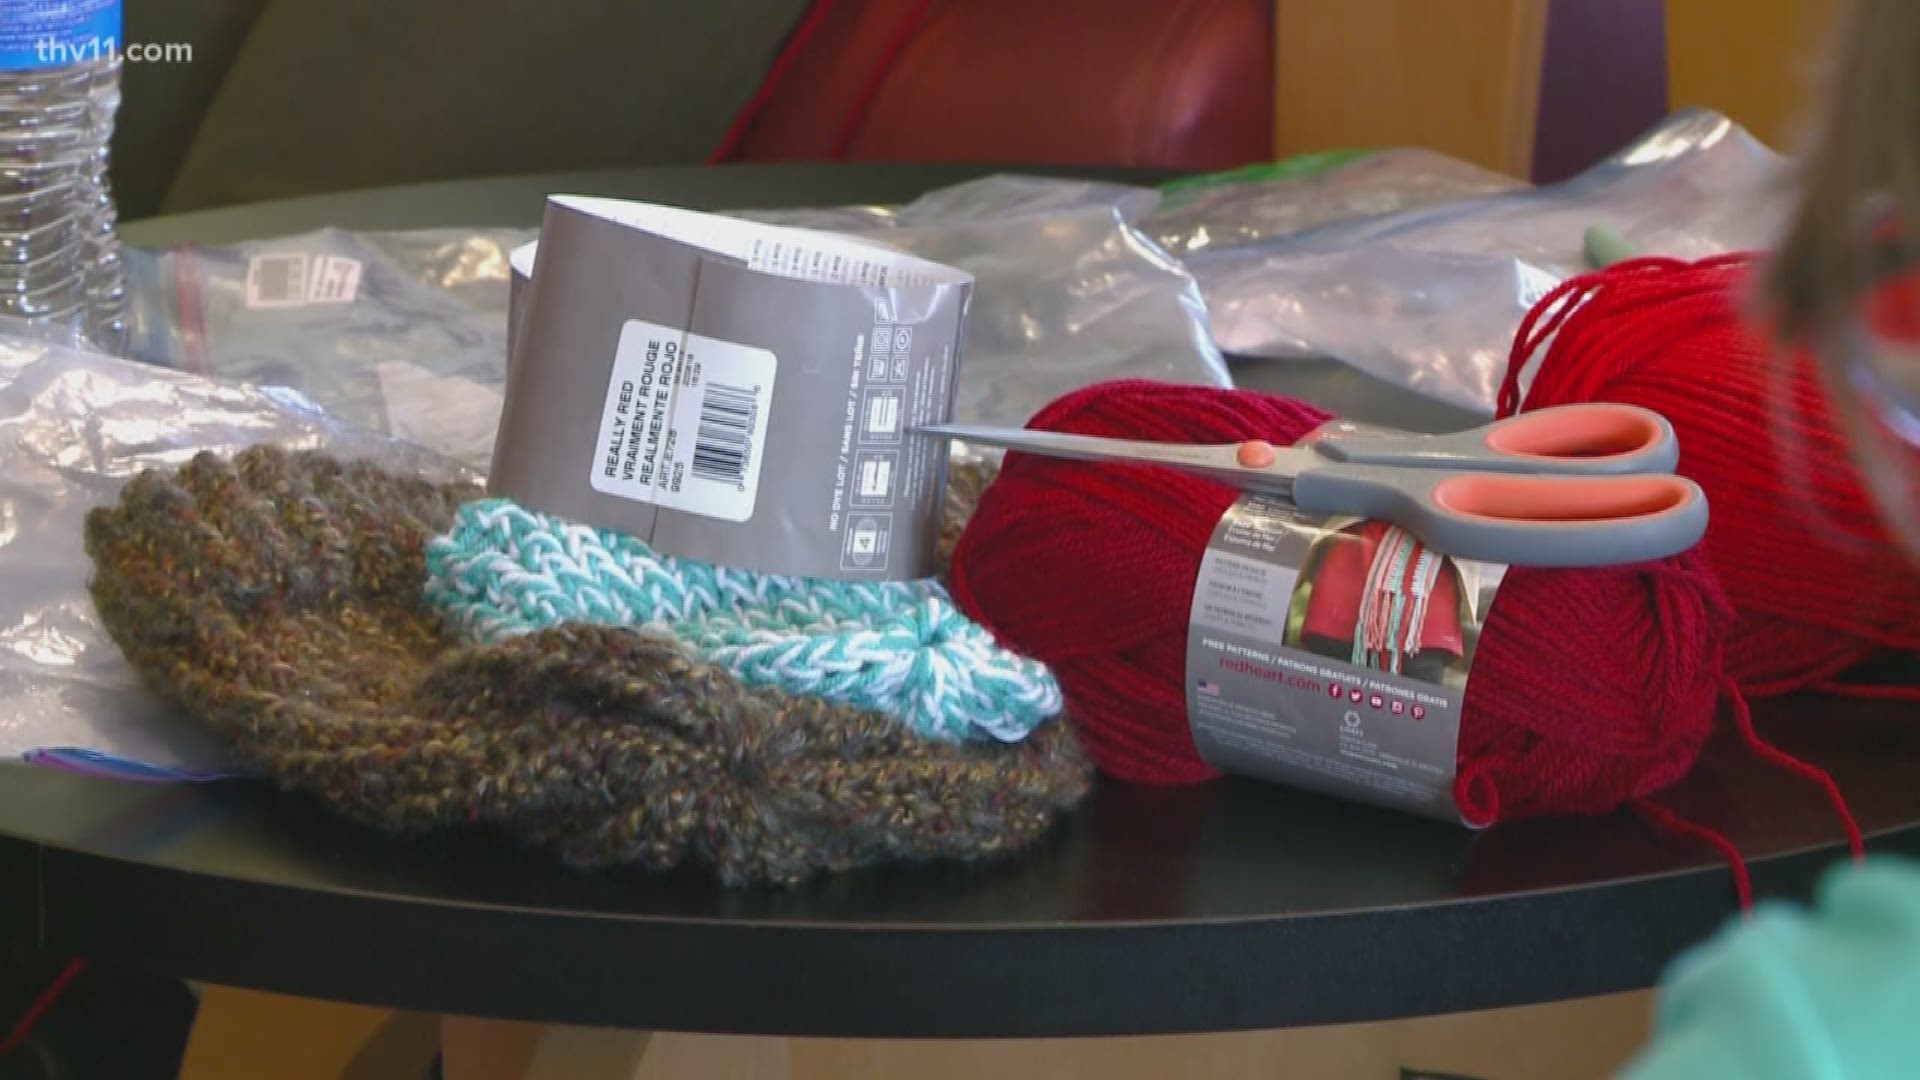 The "Knitting for a Cause" community project at the Main Branch of the Laman Library in North Little Rock usually knits hats for the homeless.